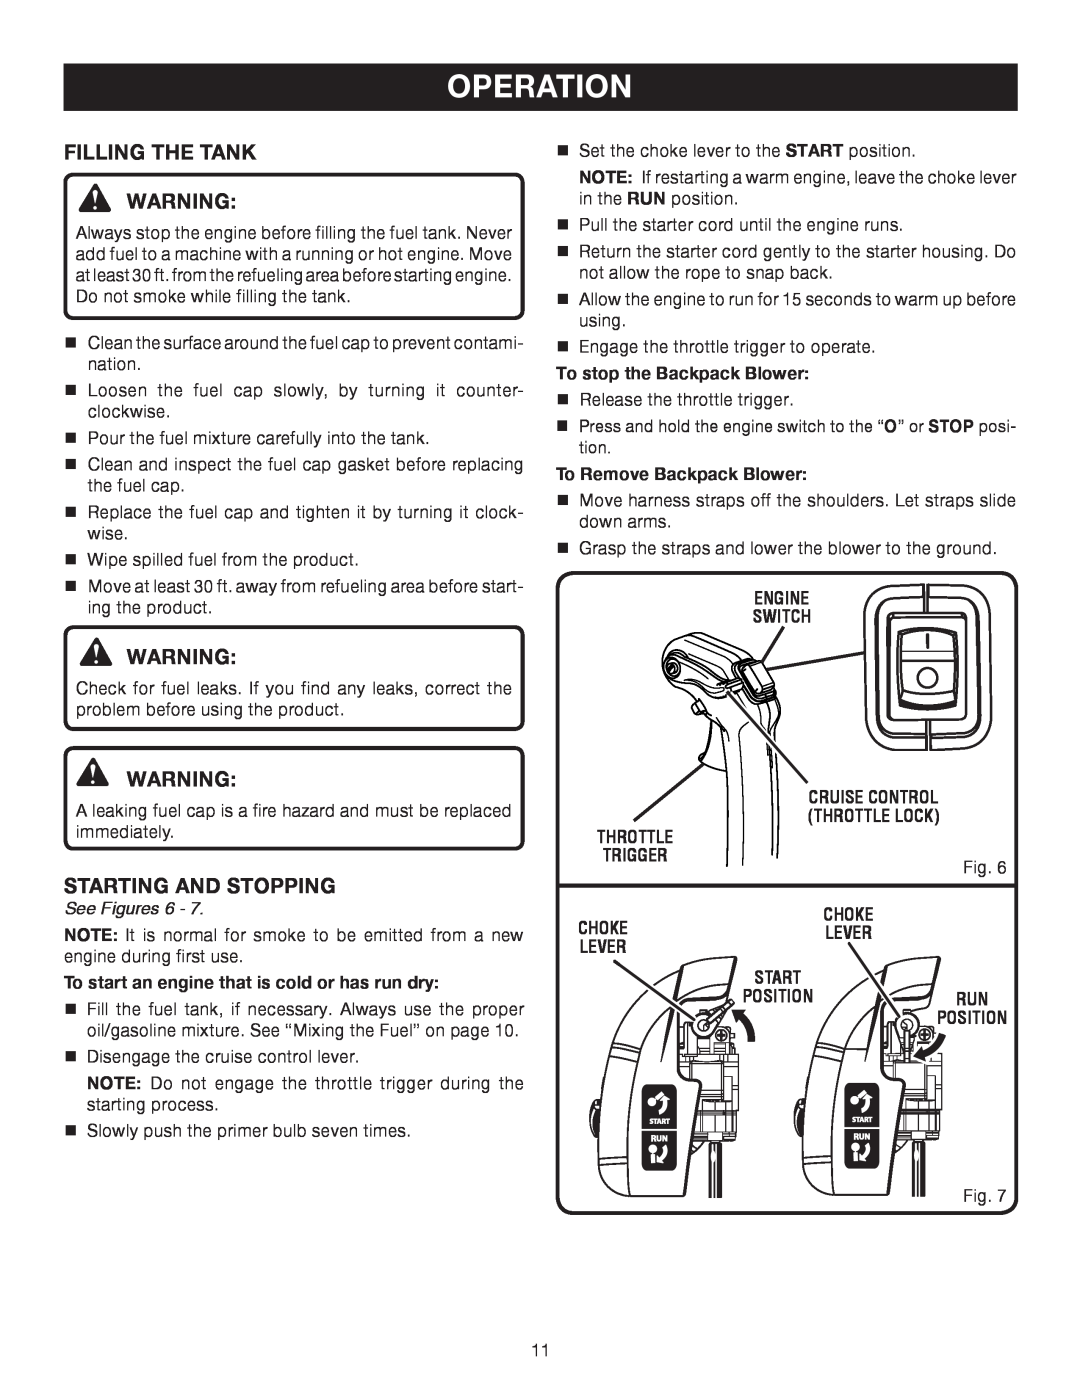 Ryobi Outdoor RY08570 Operation, See Figures, To start an engine that is cold or has run dry, To stop the Backpack Blower 